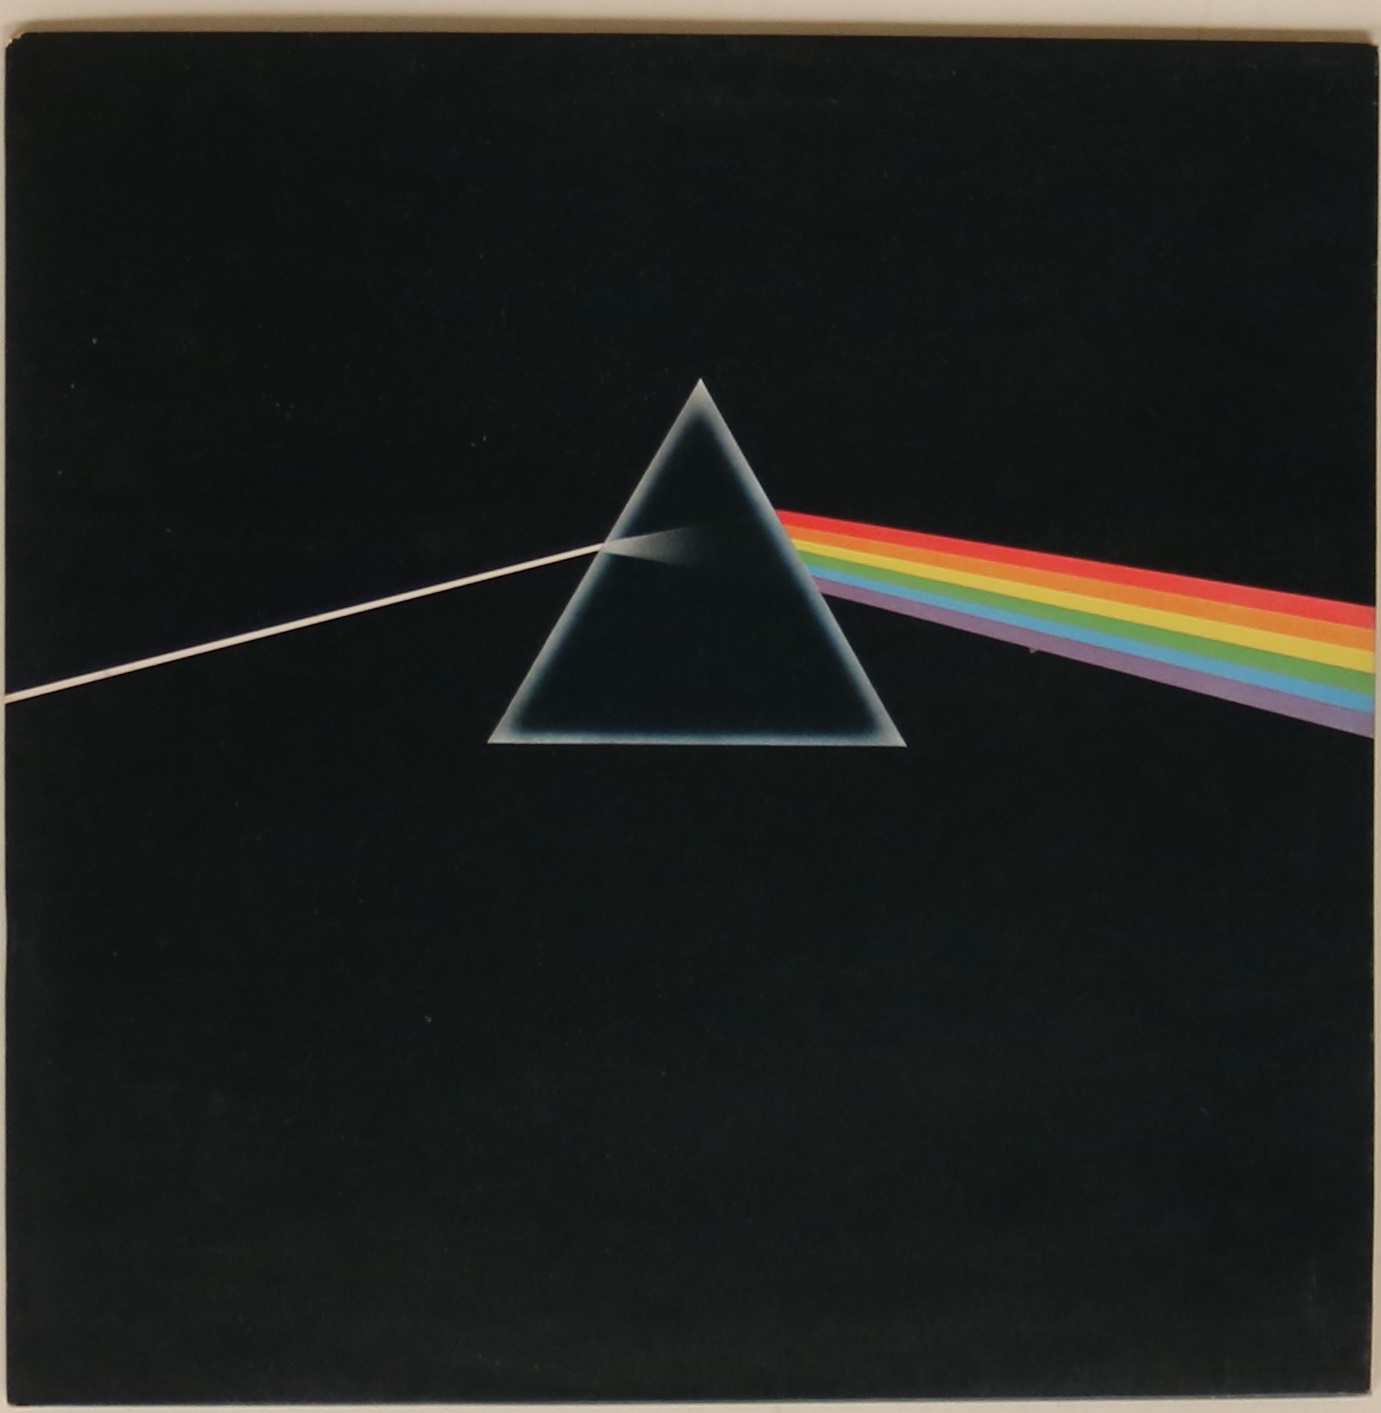 PINK FLOYD - DARK SIDE OF THE MOON - An absolutely stunning copy of the first pressing of the prog